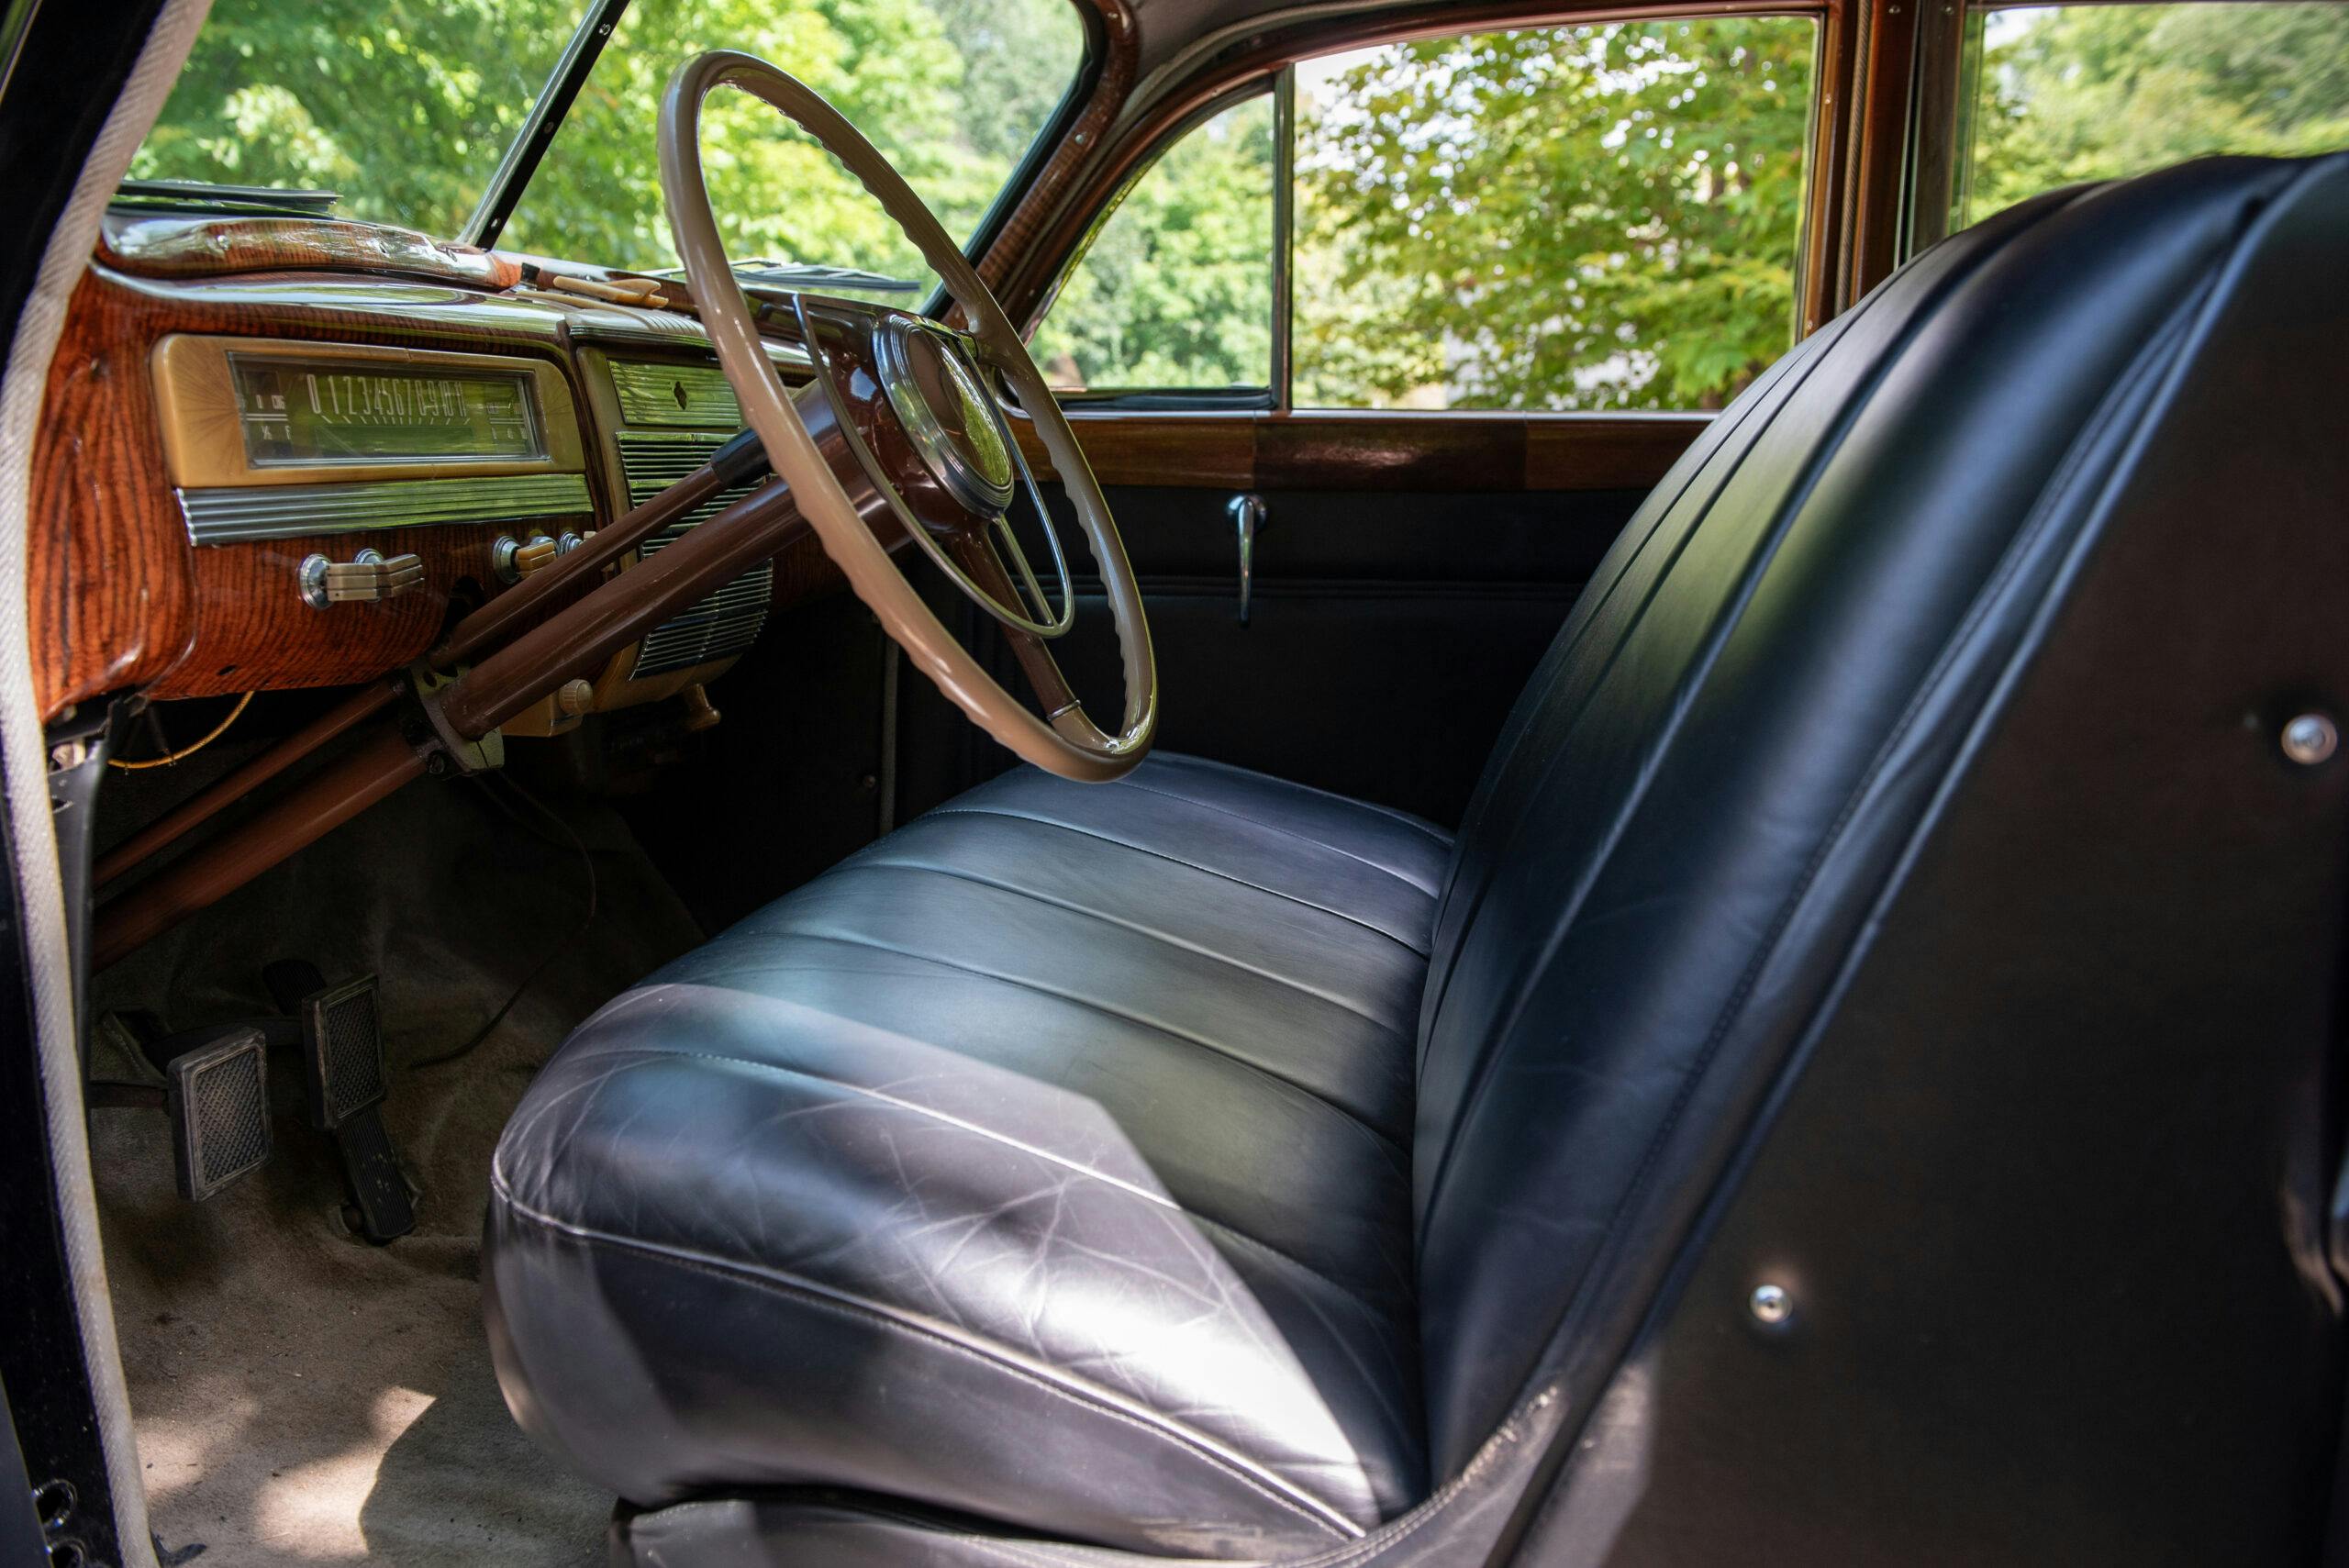 1941 Packard Super Eight One-Eighty Limo interior front seat